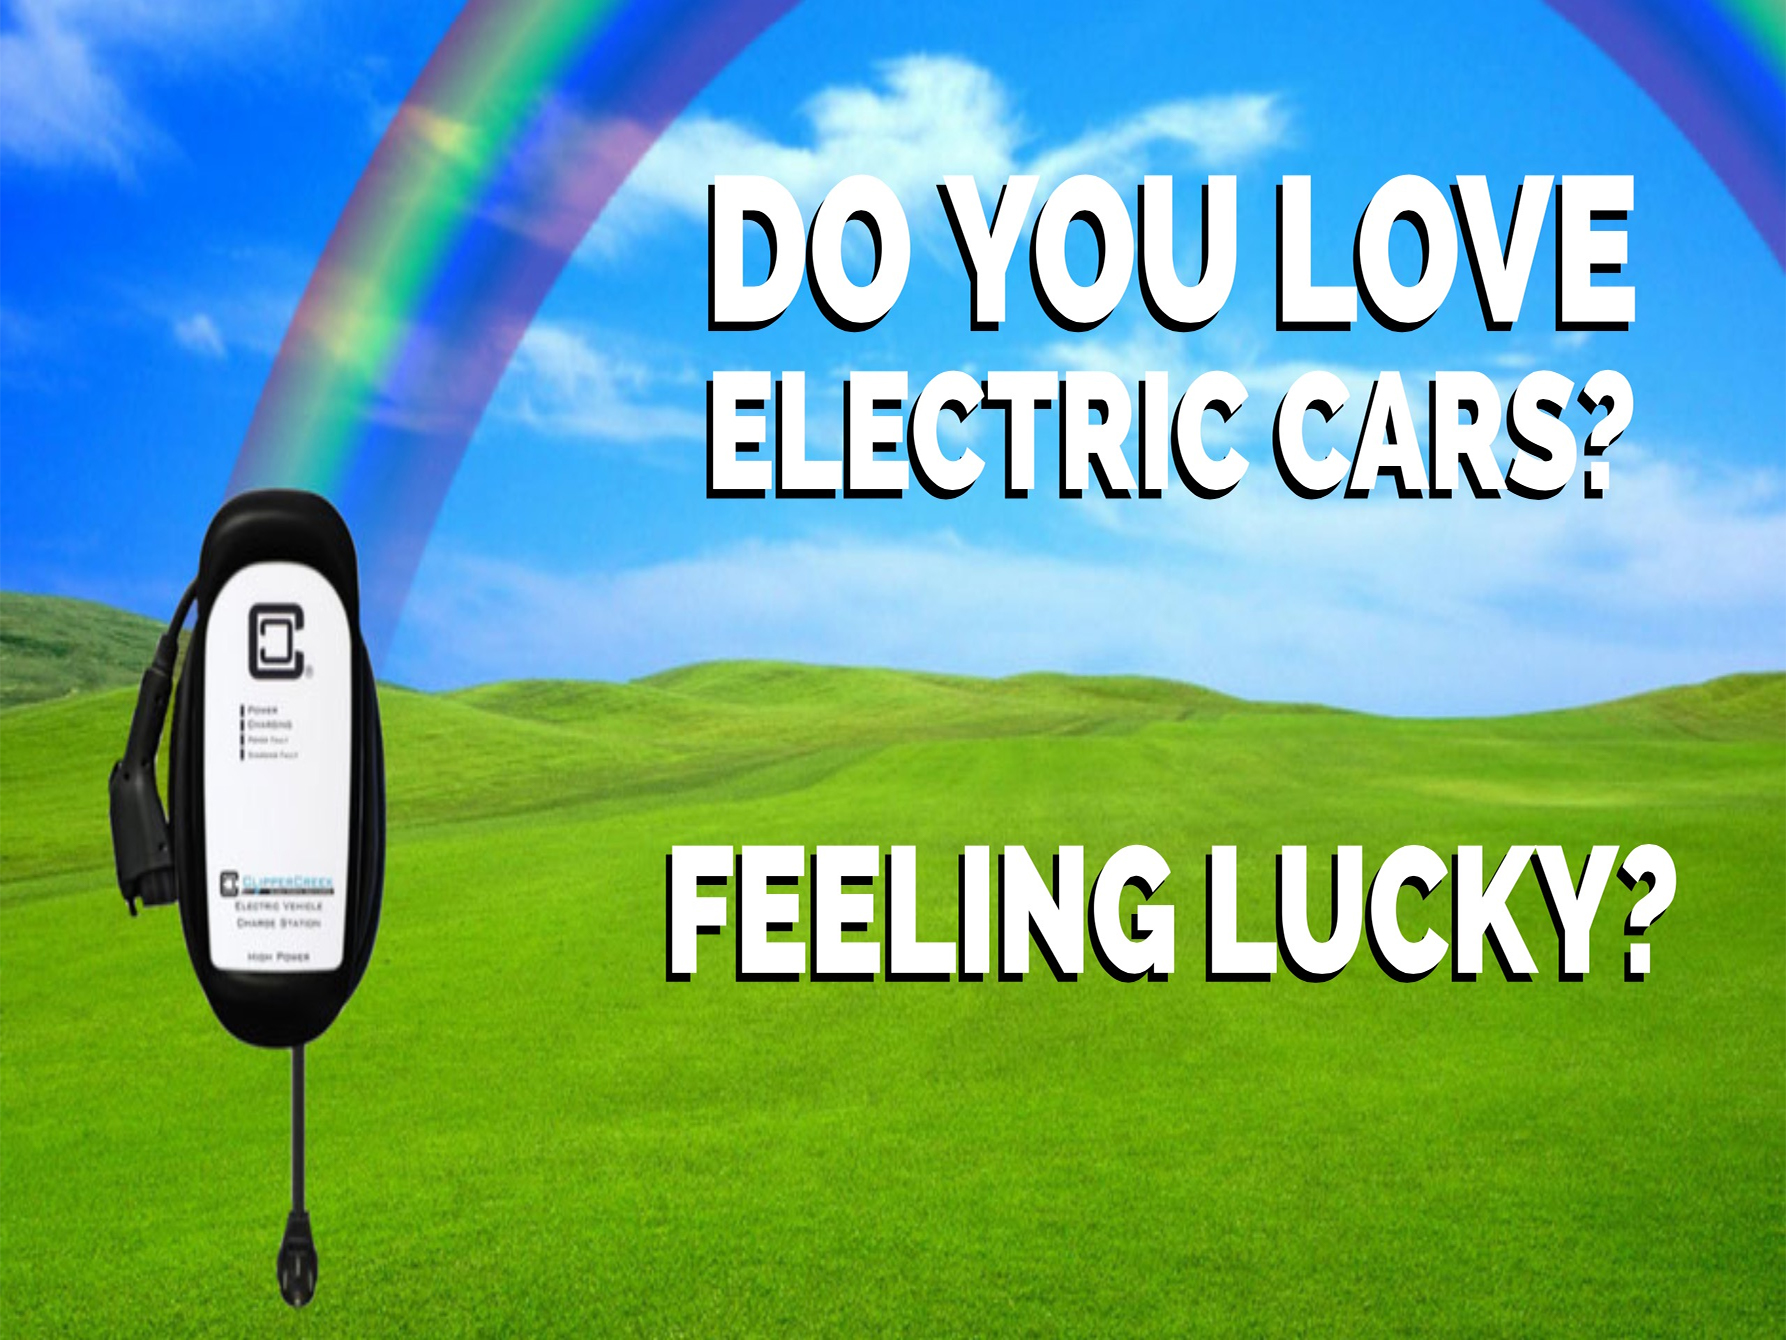 Are You Feeling Lucky? Enter to Win a Free Charging Station